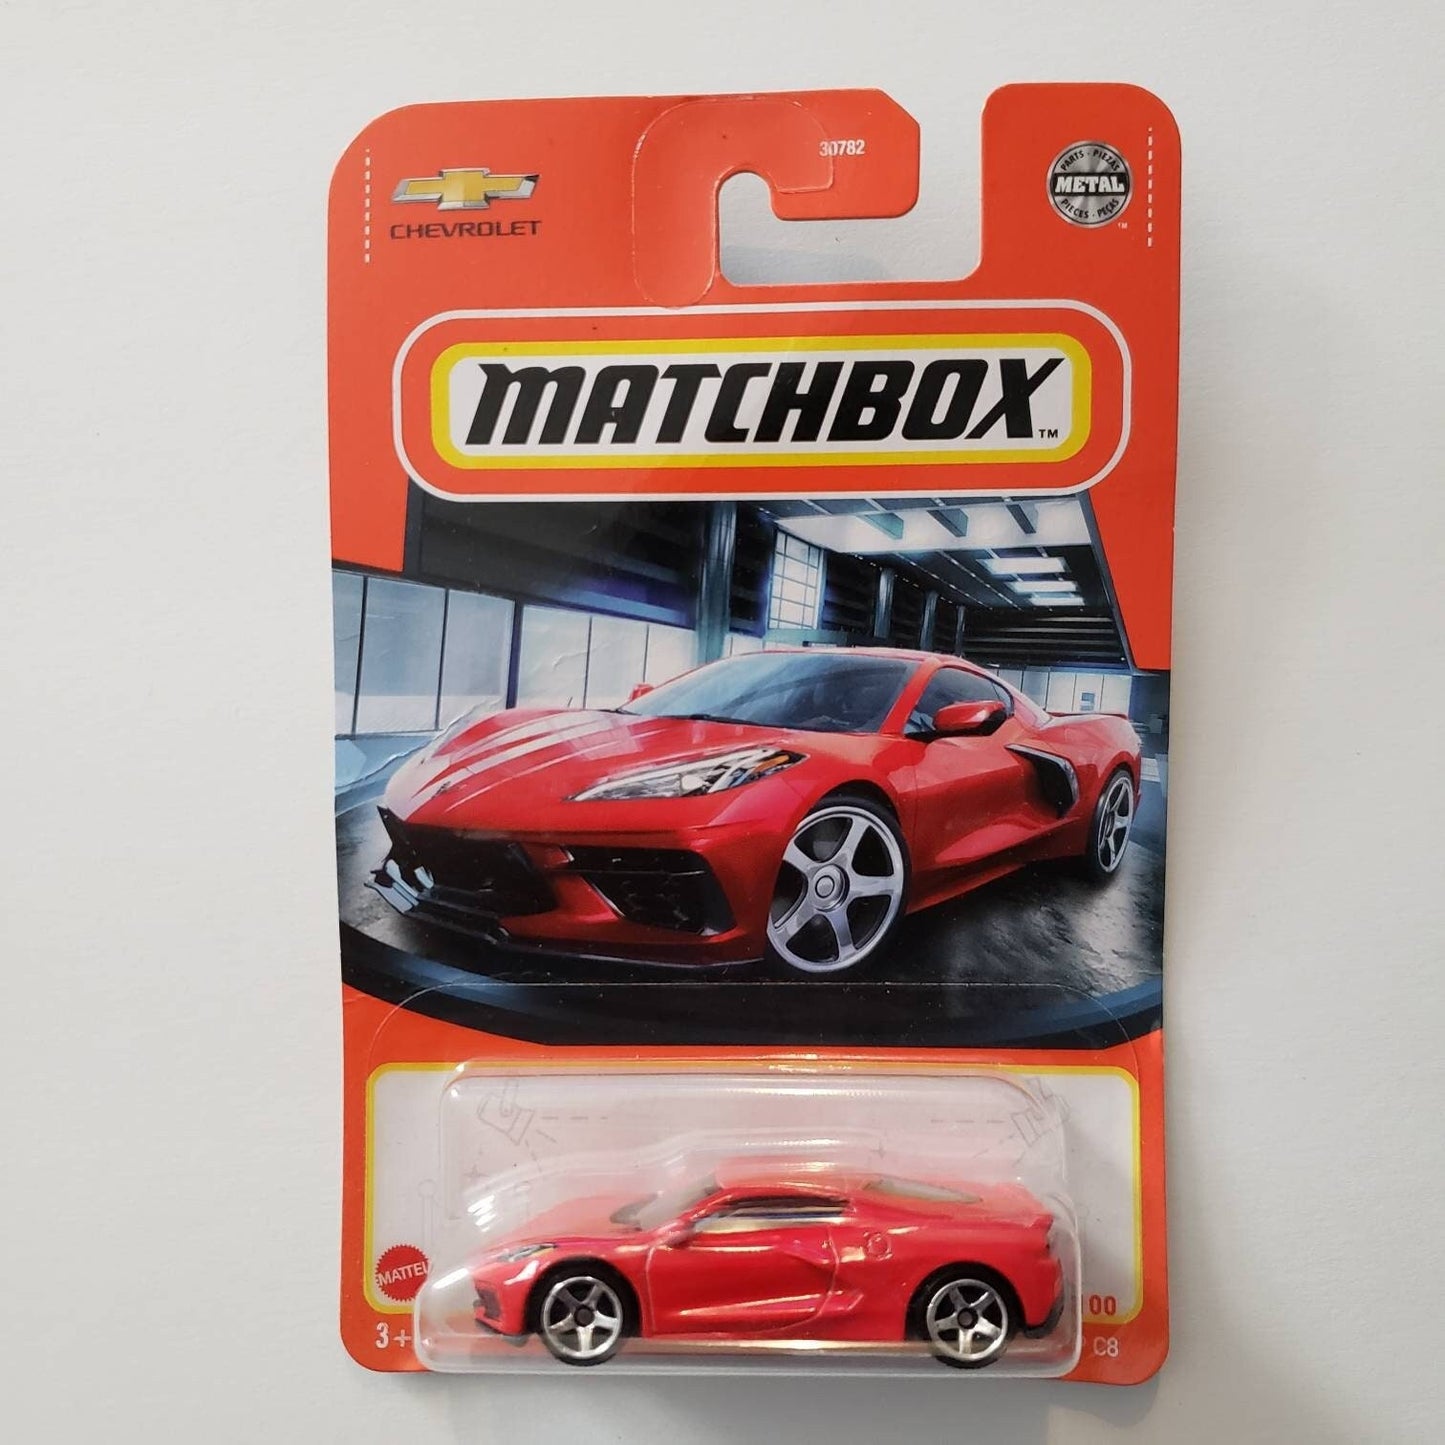 Matchbox Ford Police Interceptor Metalflake Grey MBX Metro Perfect Birthday Gift Miniature Collectable Scale Model Toy Car Lot